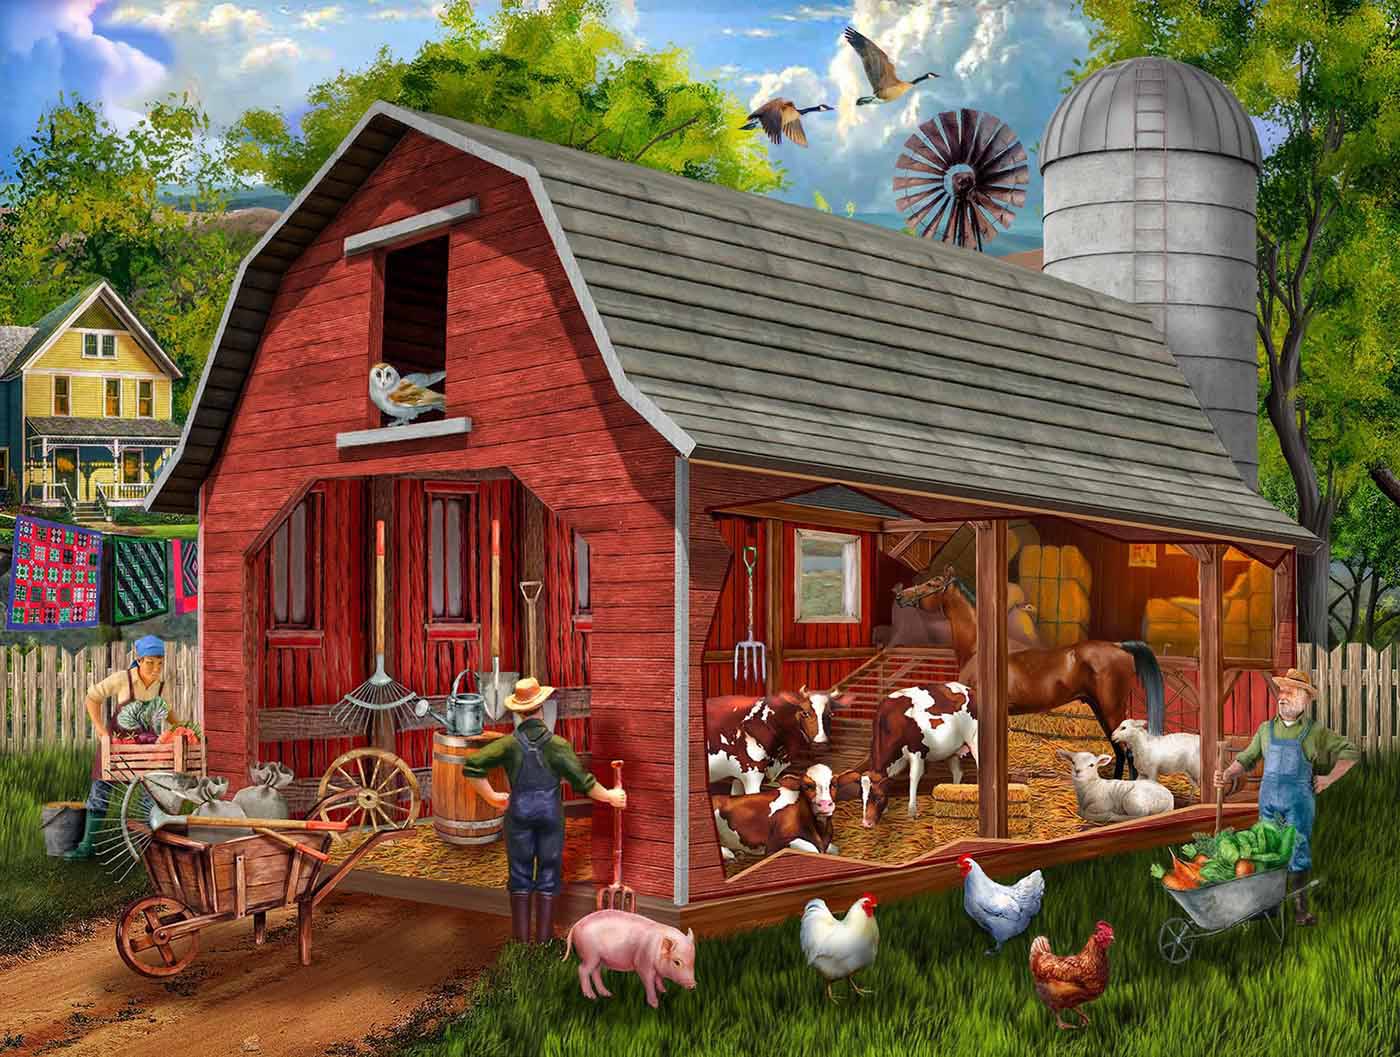 The Old Red Barn Farm Jigsaw Puzzle